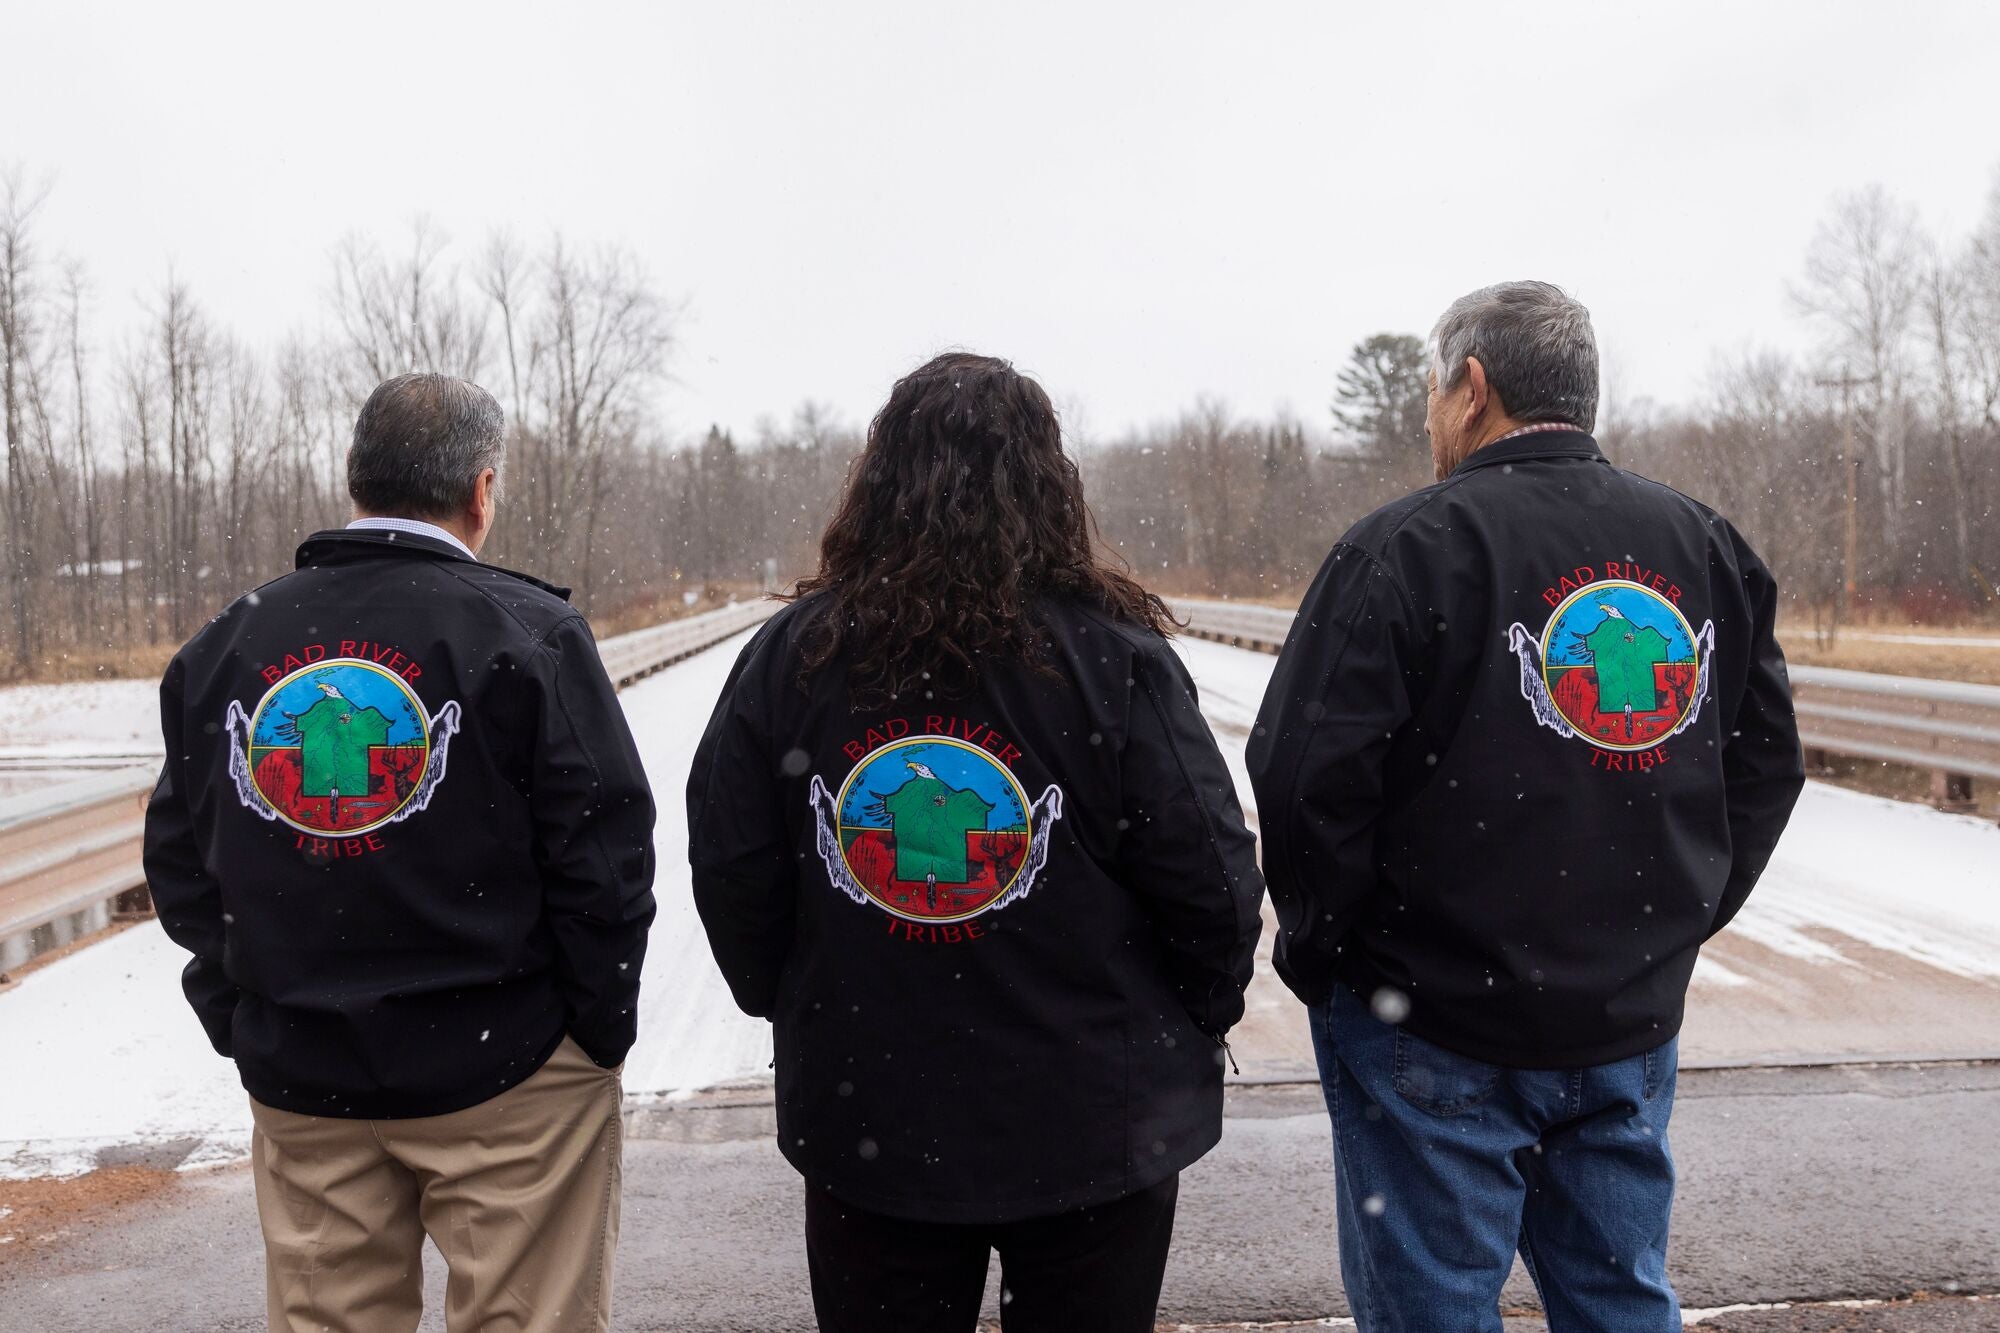 Bad River Band of Lake Superior Chippewa Tribal Vice Chairman Patrick Bigboy, Senior Member Liz Arbuckle, and Tribal Chairman Robert Blanchard, left to right. Photos from Ashland, Wisconsin and the Bad River Reservation on March 22, 2024. (Jaida Grey Eagle for Earthjustice)